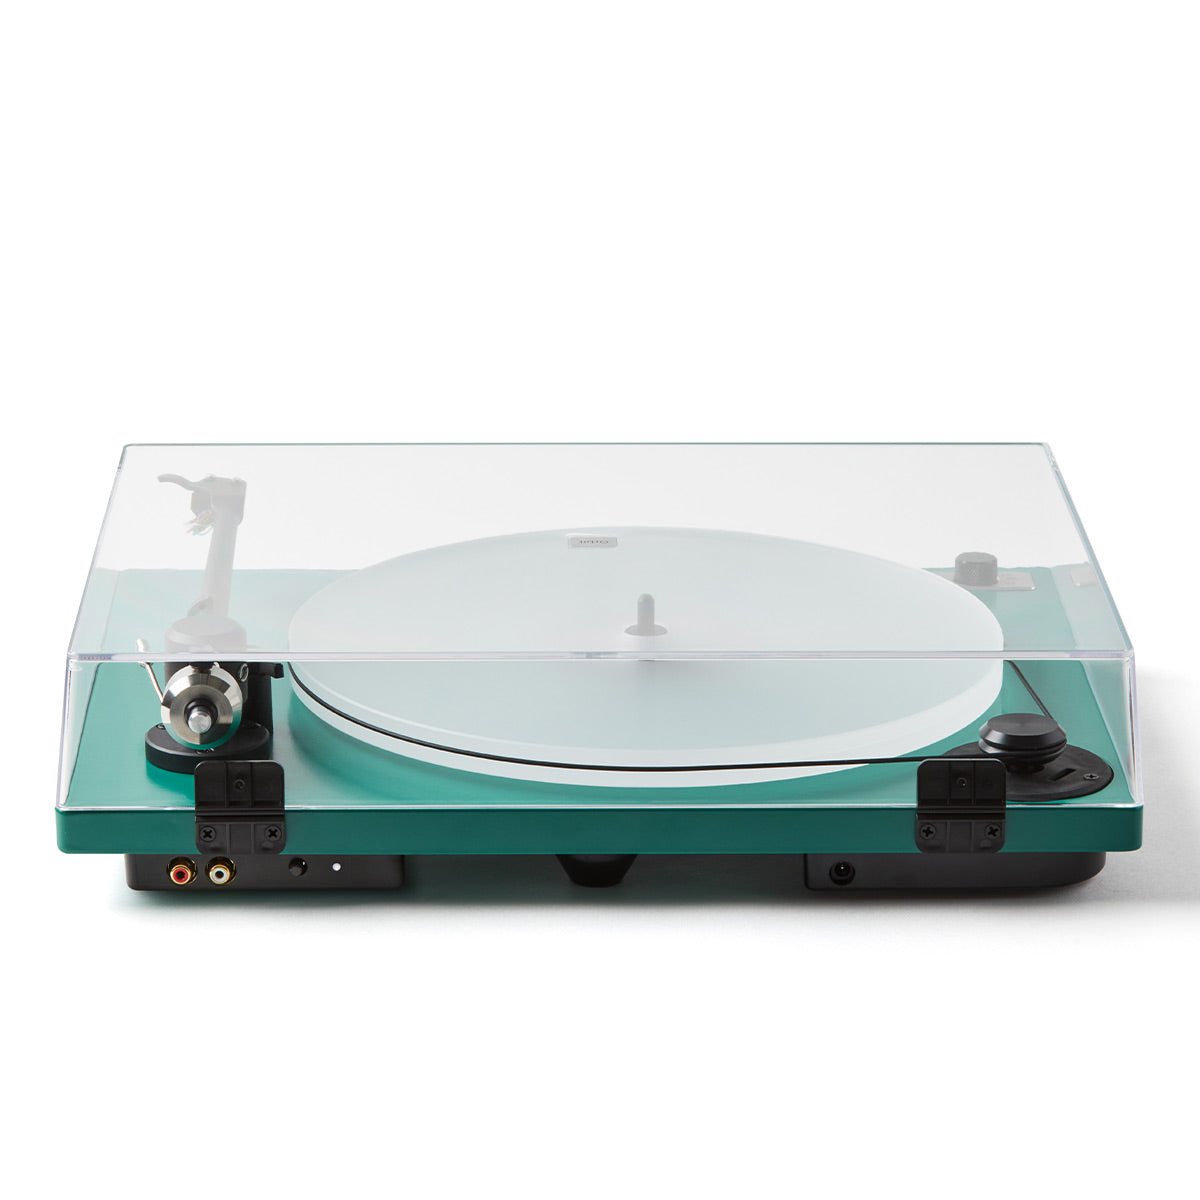 U-Turn Audio Orbit 2 Special Turntable with Built-In Preamp and Ortofon 2M Red Cartridge (Green)